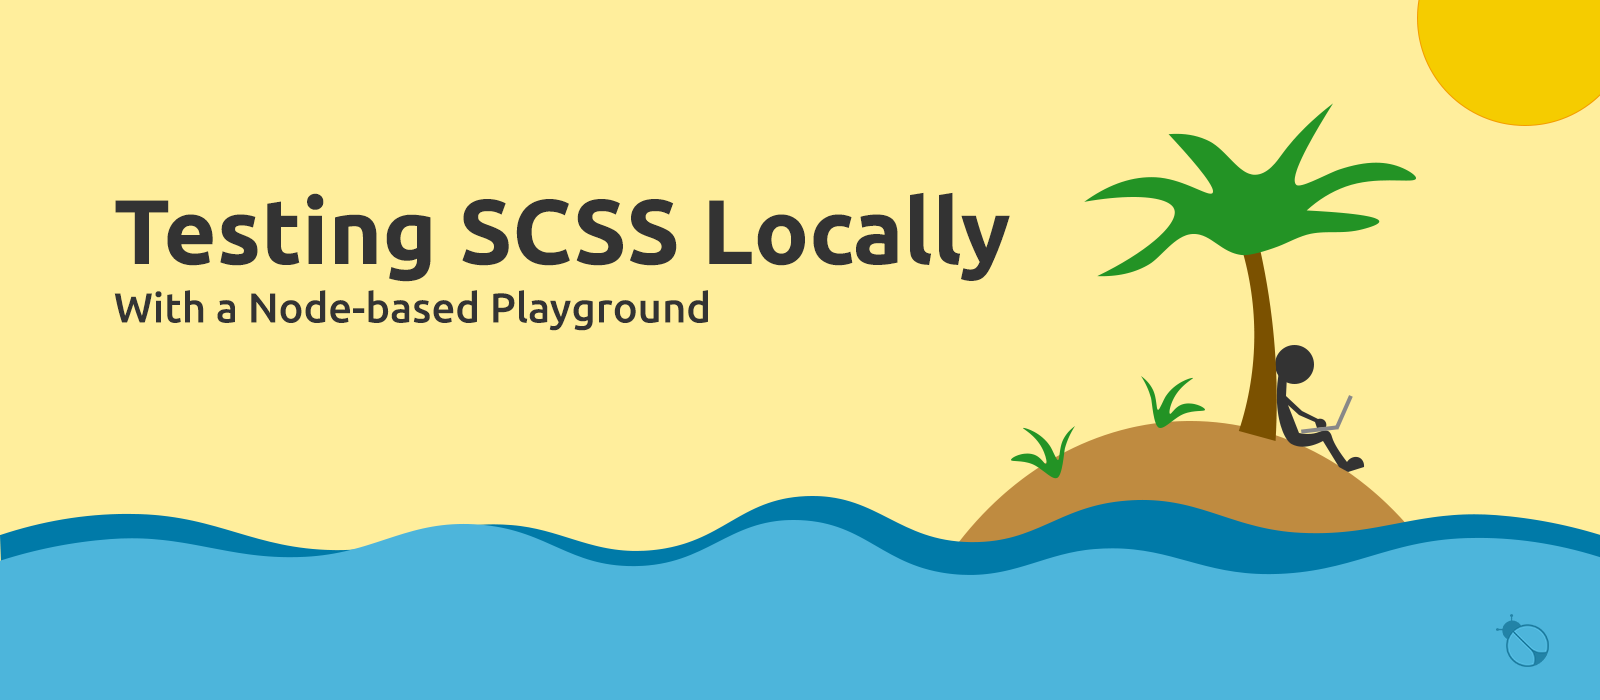 Testing SCSS Locally: How to Build a Simple Node-based Playground